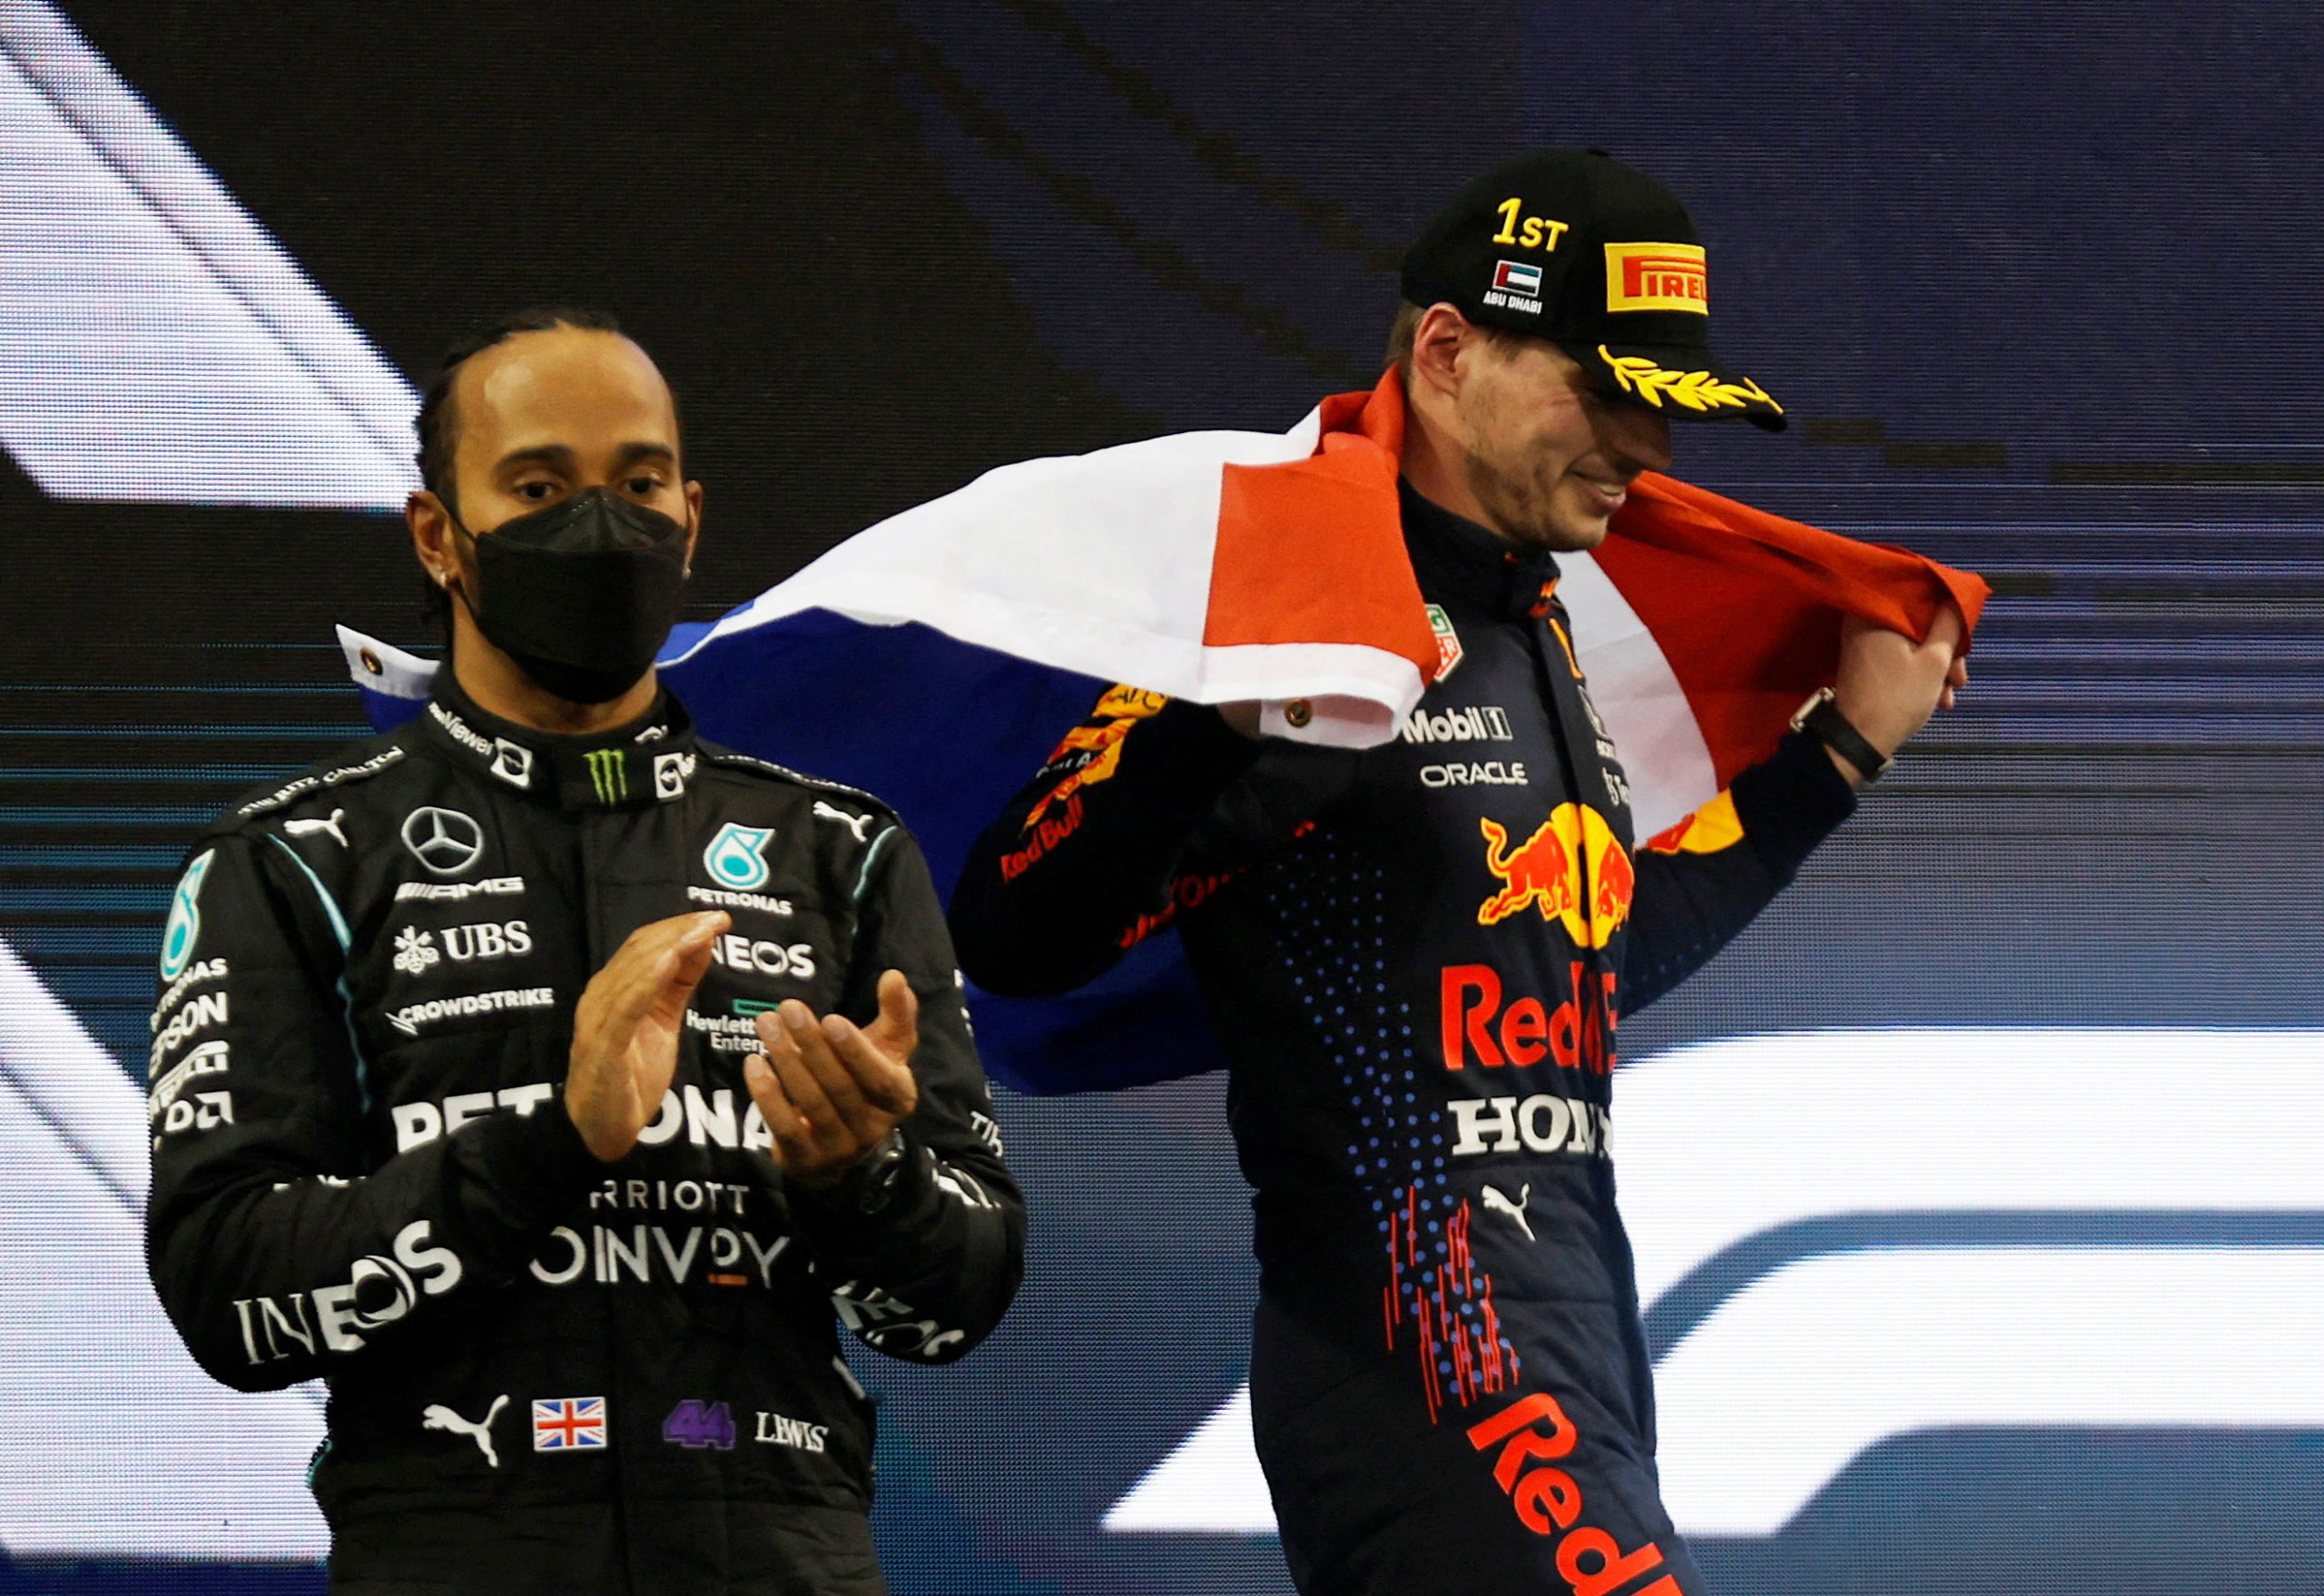 Formula One F1 - Abu Dhabi Grand Prix - Yas Marina Circuit, Abu Dhabi, United Arab Emirates - December 12, 2021 Red Bull's Max Verstappen celebrates winning the race and the world championship with the Netherlands flag on the podium as Mercedes' Lewis Hamilton looks on after finishing second 